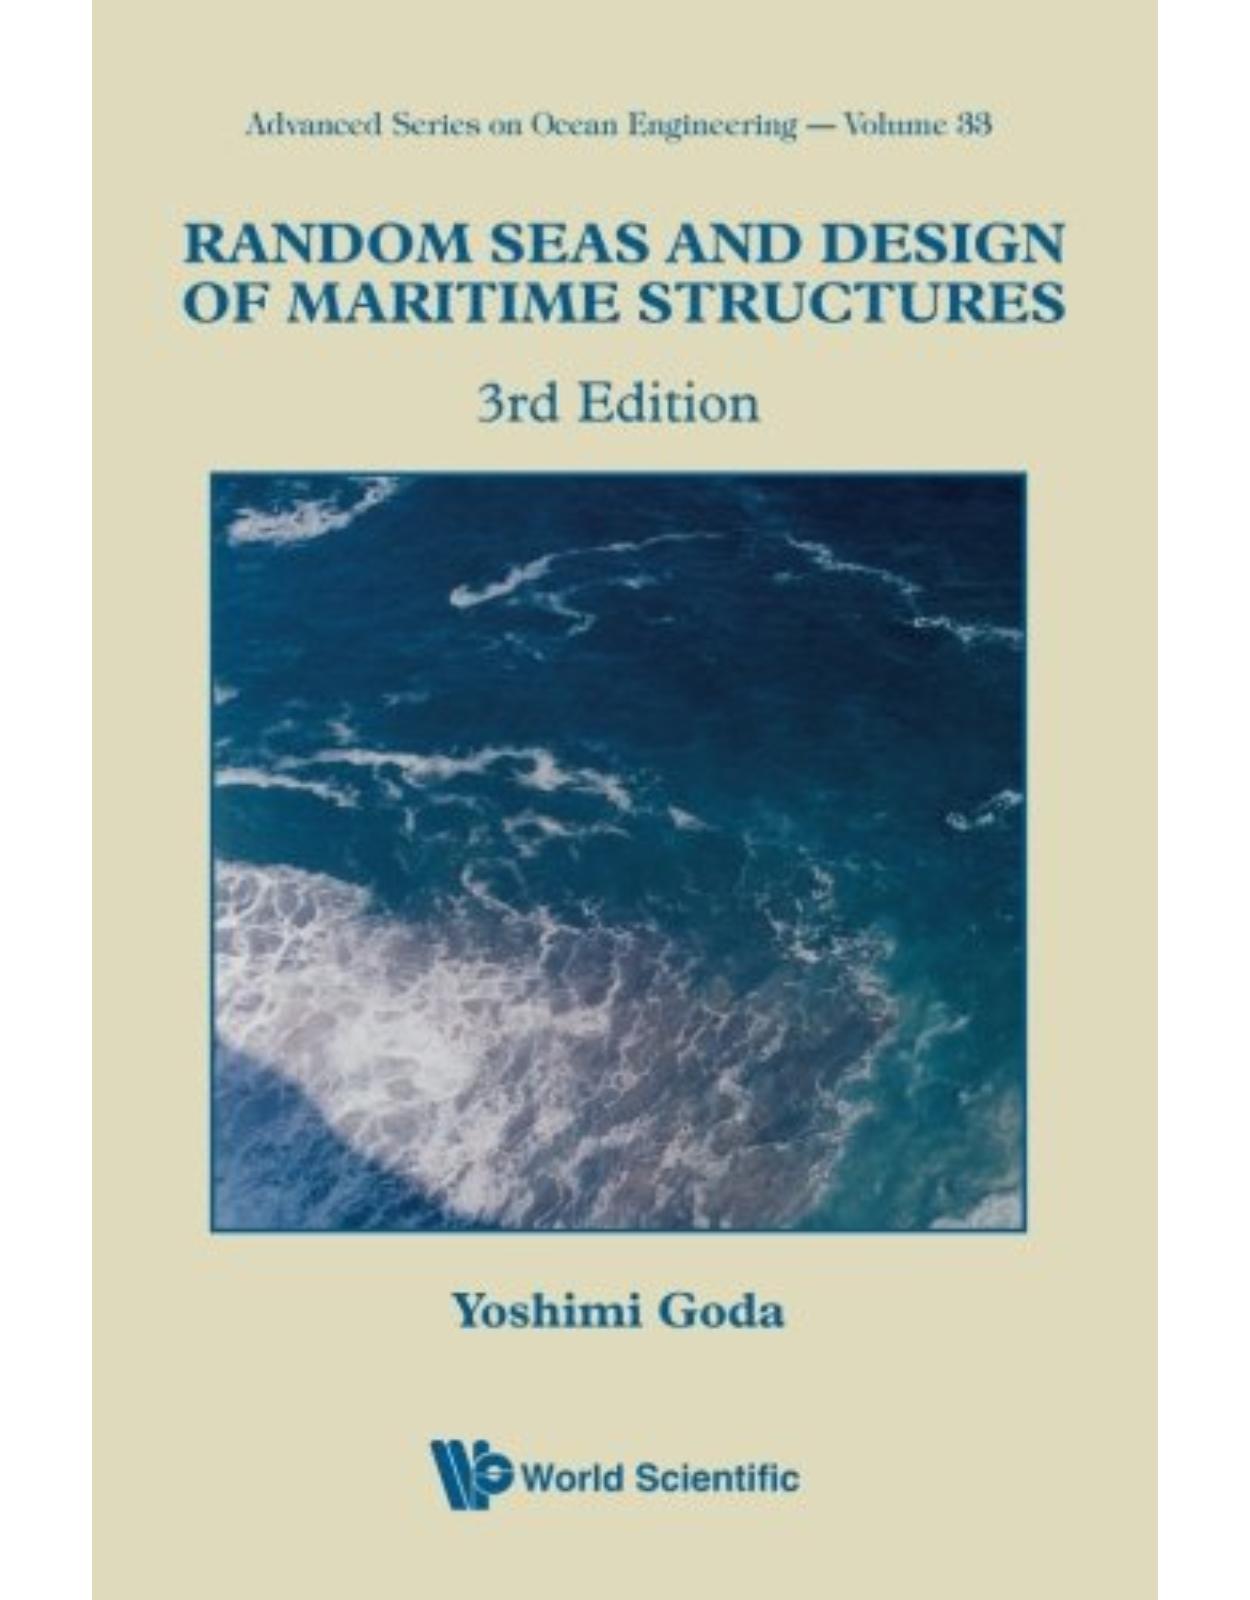 Random Seas And Design Of Maritime Structures (3Rd Edition) (Advanced Series on Ocean Engineering )